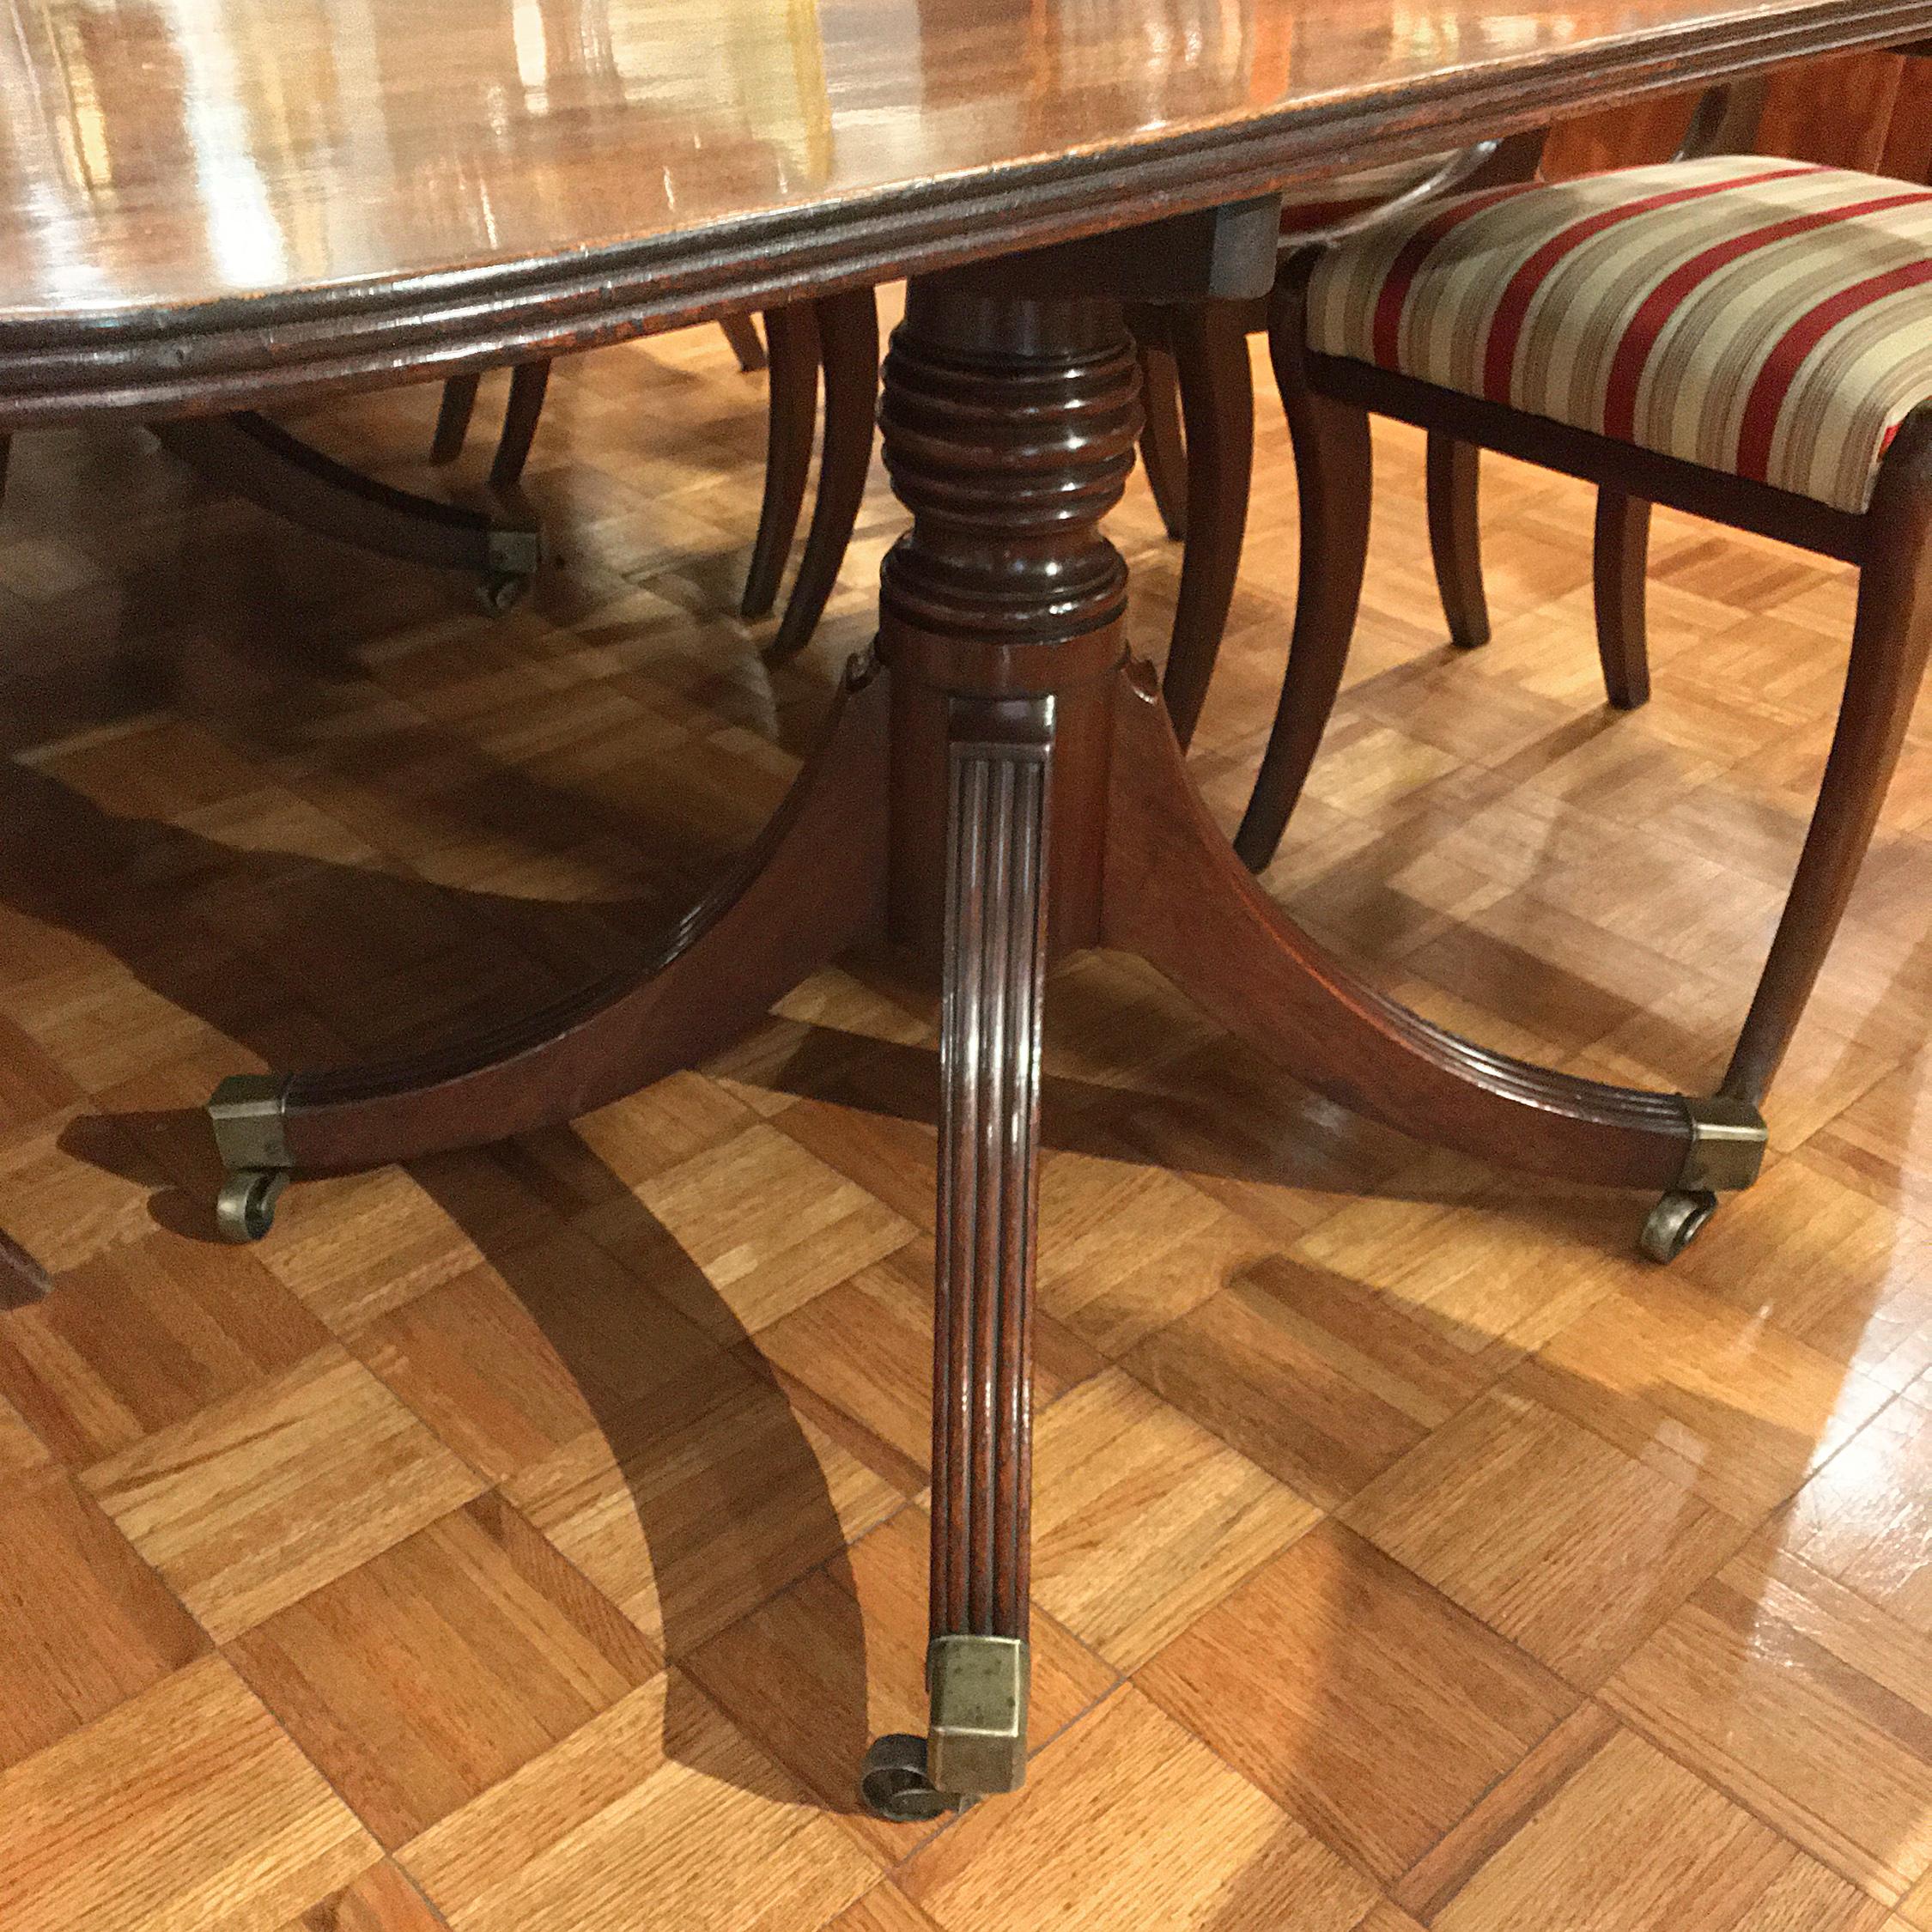 Early 19th Century Regency Mahogany Three Pedestal Dining Table In Excellent Condition For Sale In Long Island City, NY